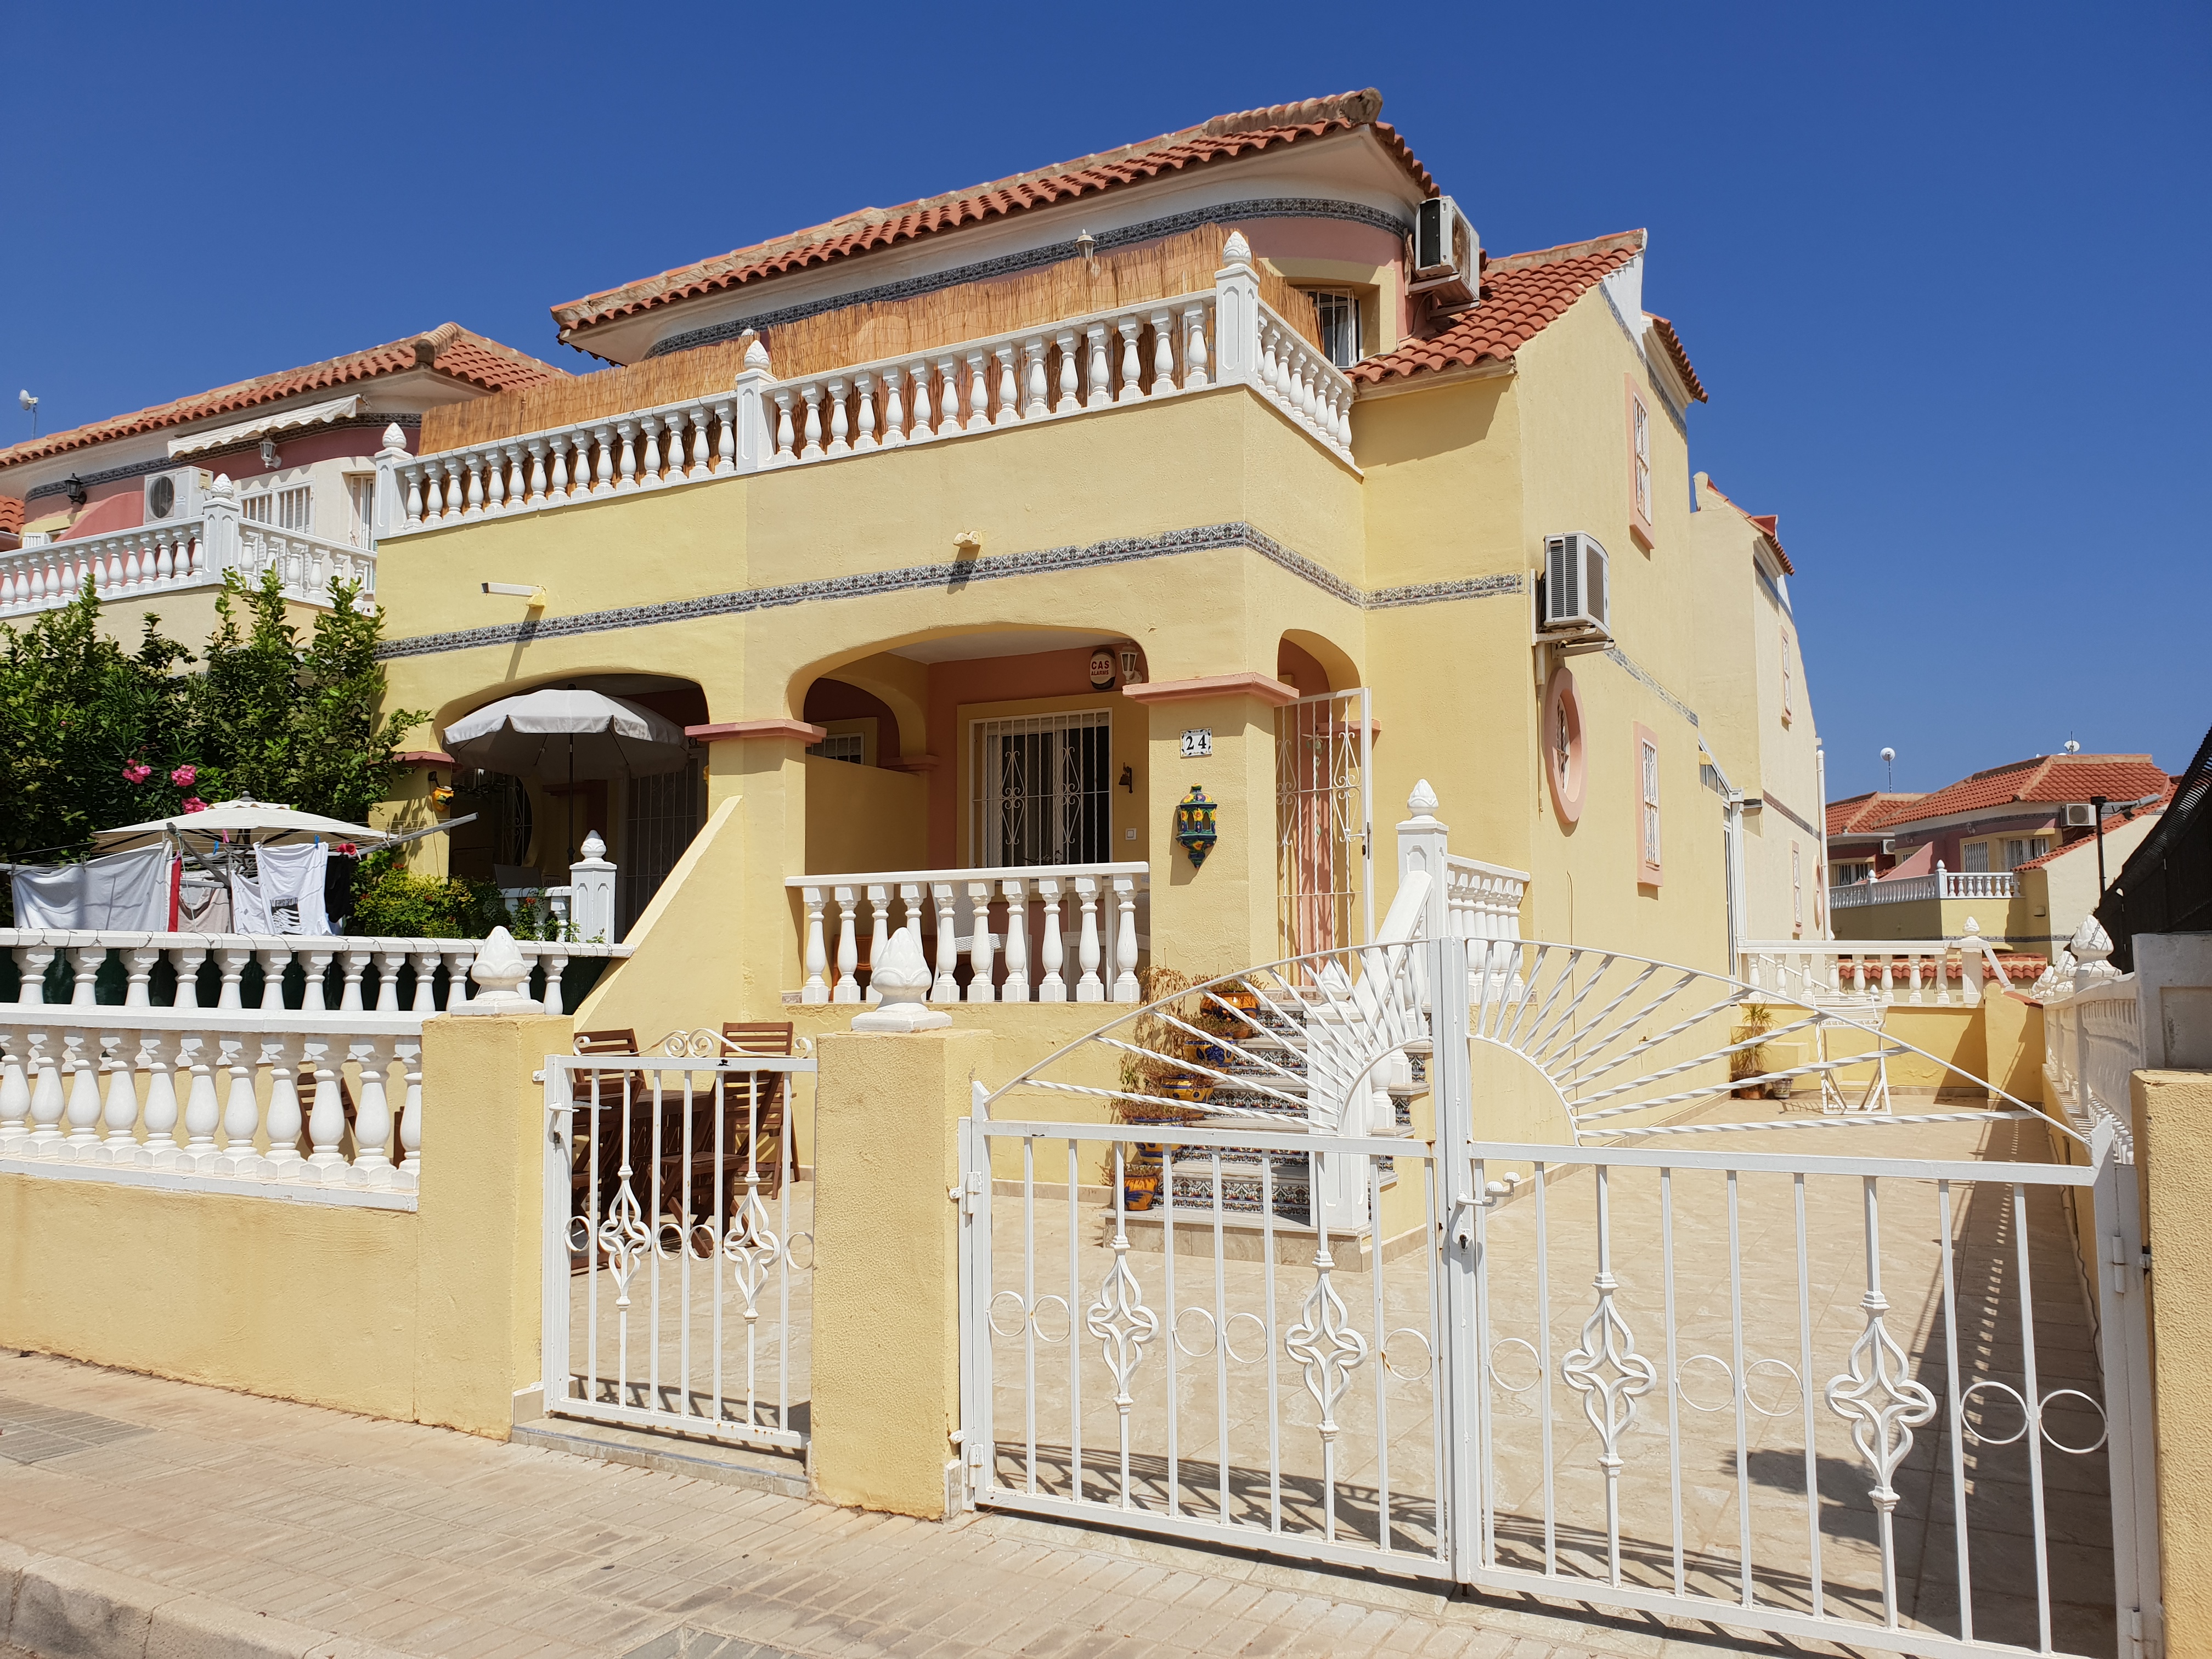 Two bedroom South-facing quad house for sale near beaches and La Zenia Boulevard